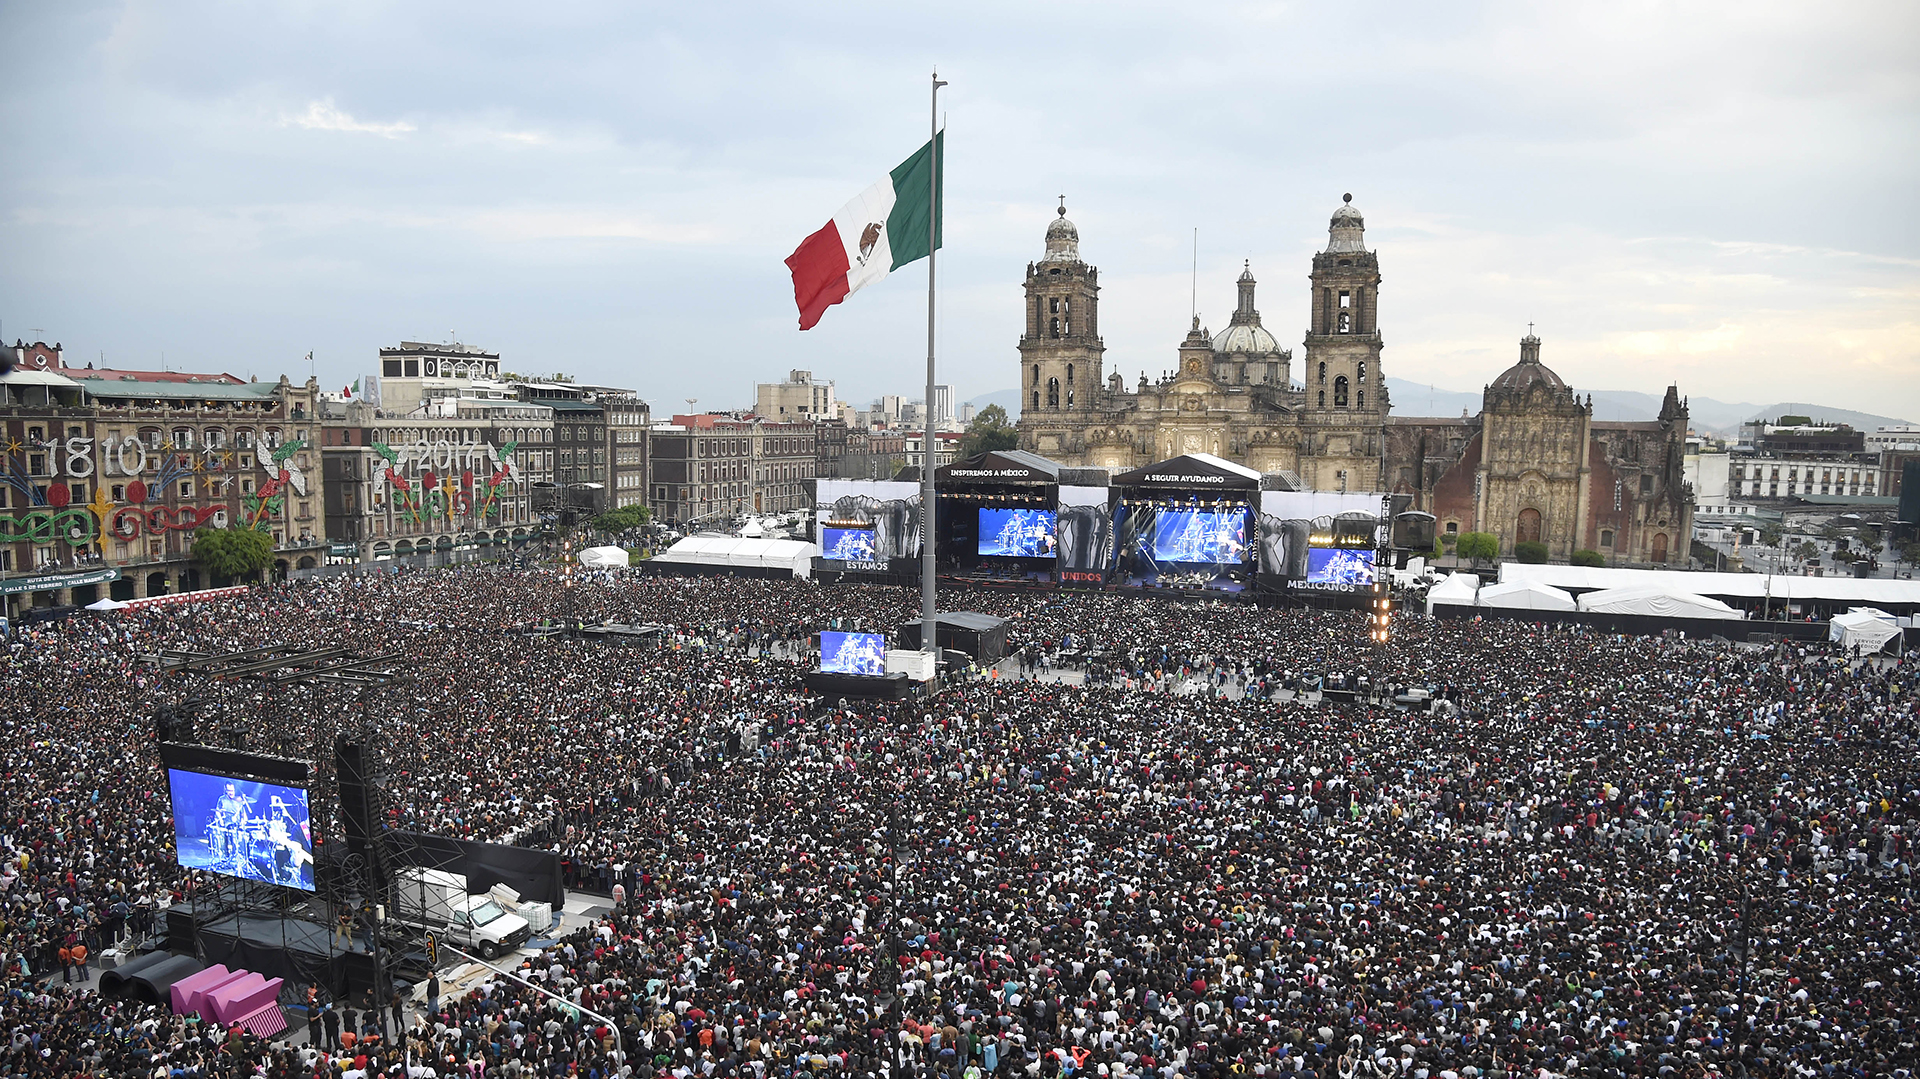 Thousands of people enjoy a concert by Latin music stars to benefit victims of Mexico's September 19 earthquake, at the Zocalo Square in Mexico City on October 8, 2017. / AFP PHOTO / ALFREDO ESTRELLA